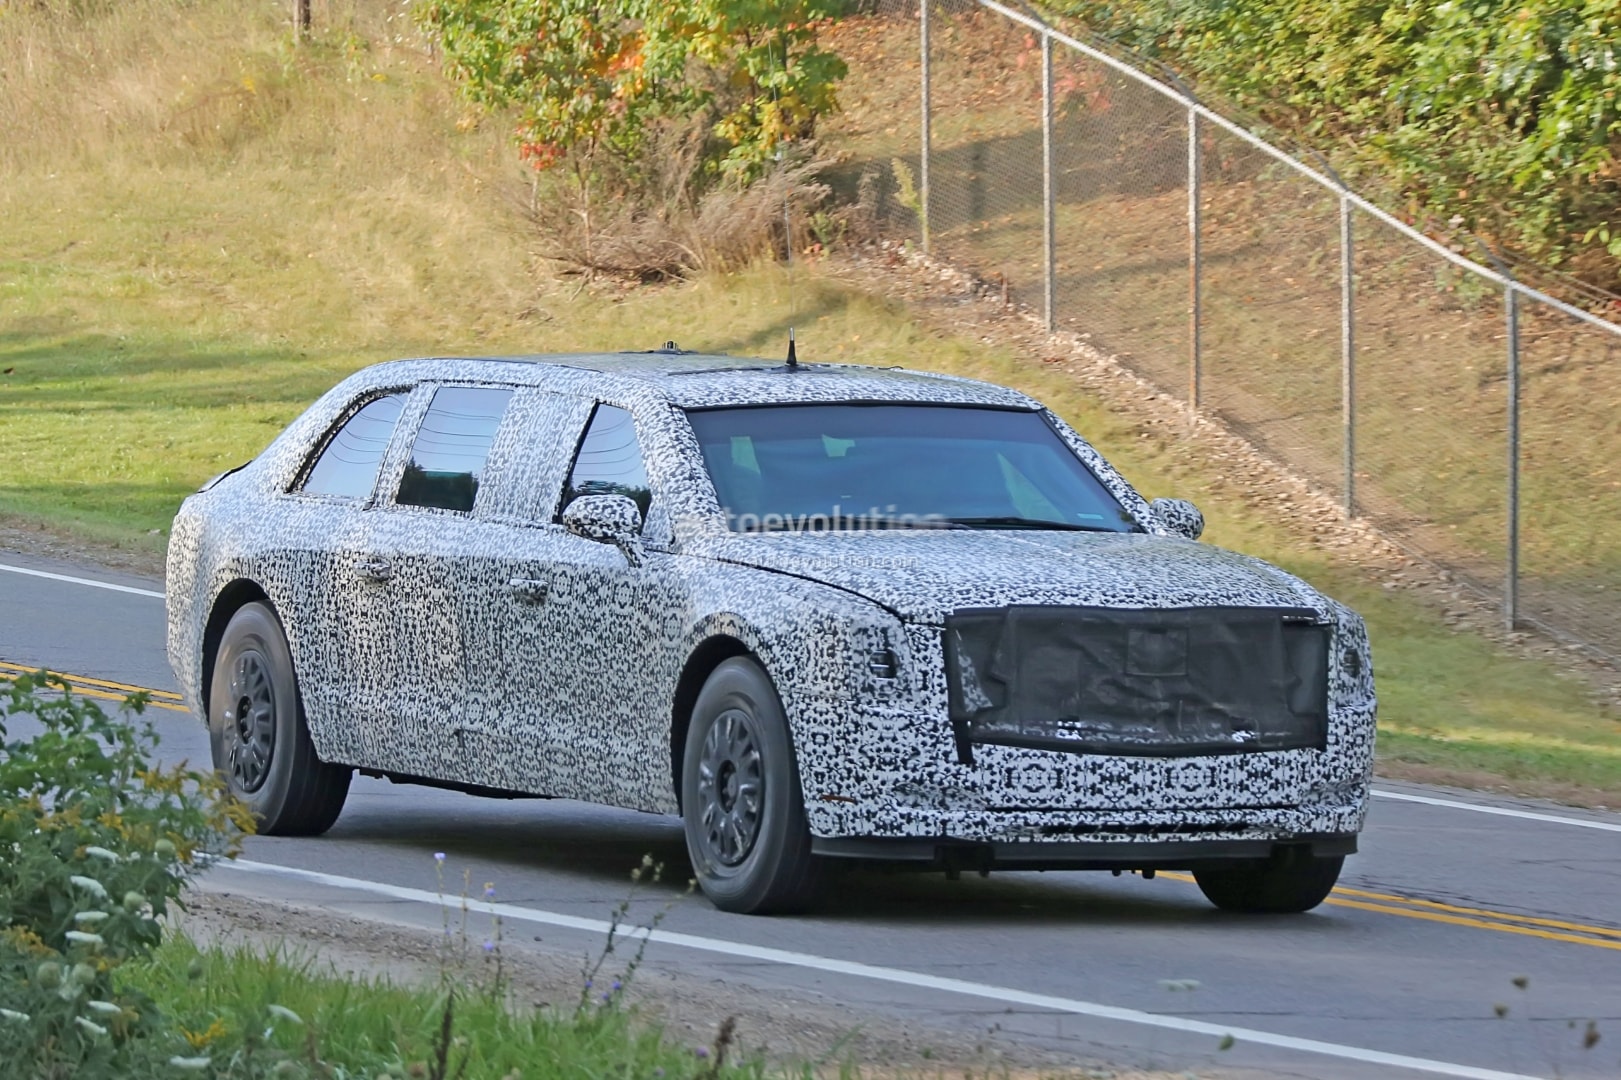 spyshots-new-cadillac-presidential-limo-beast-20-almost-ready-for-trump-120504_1.jpg